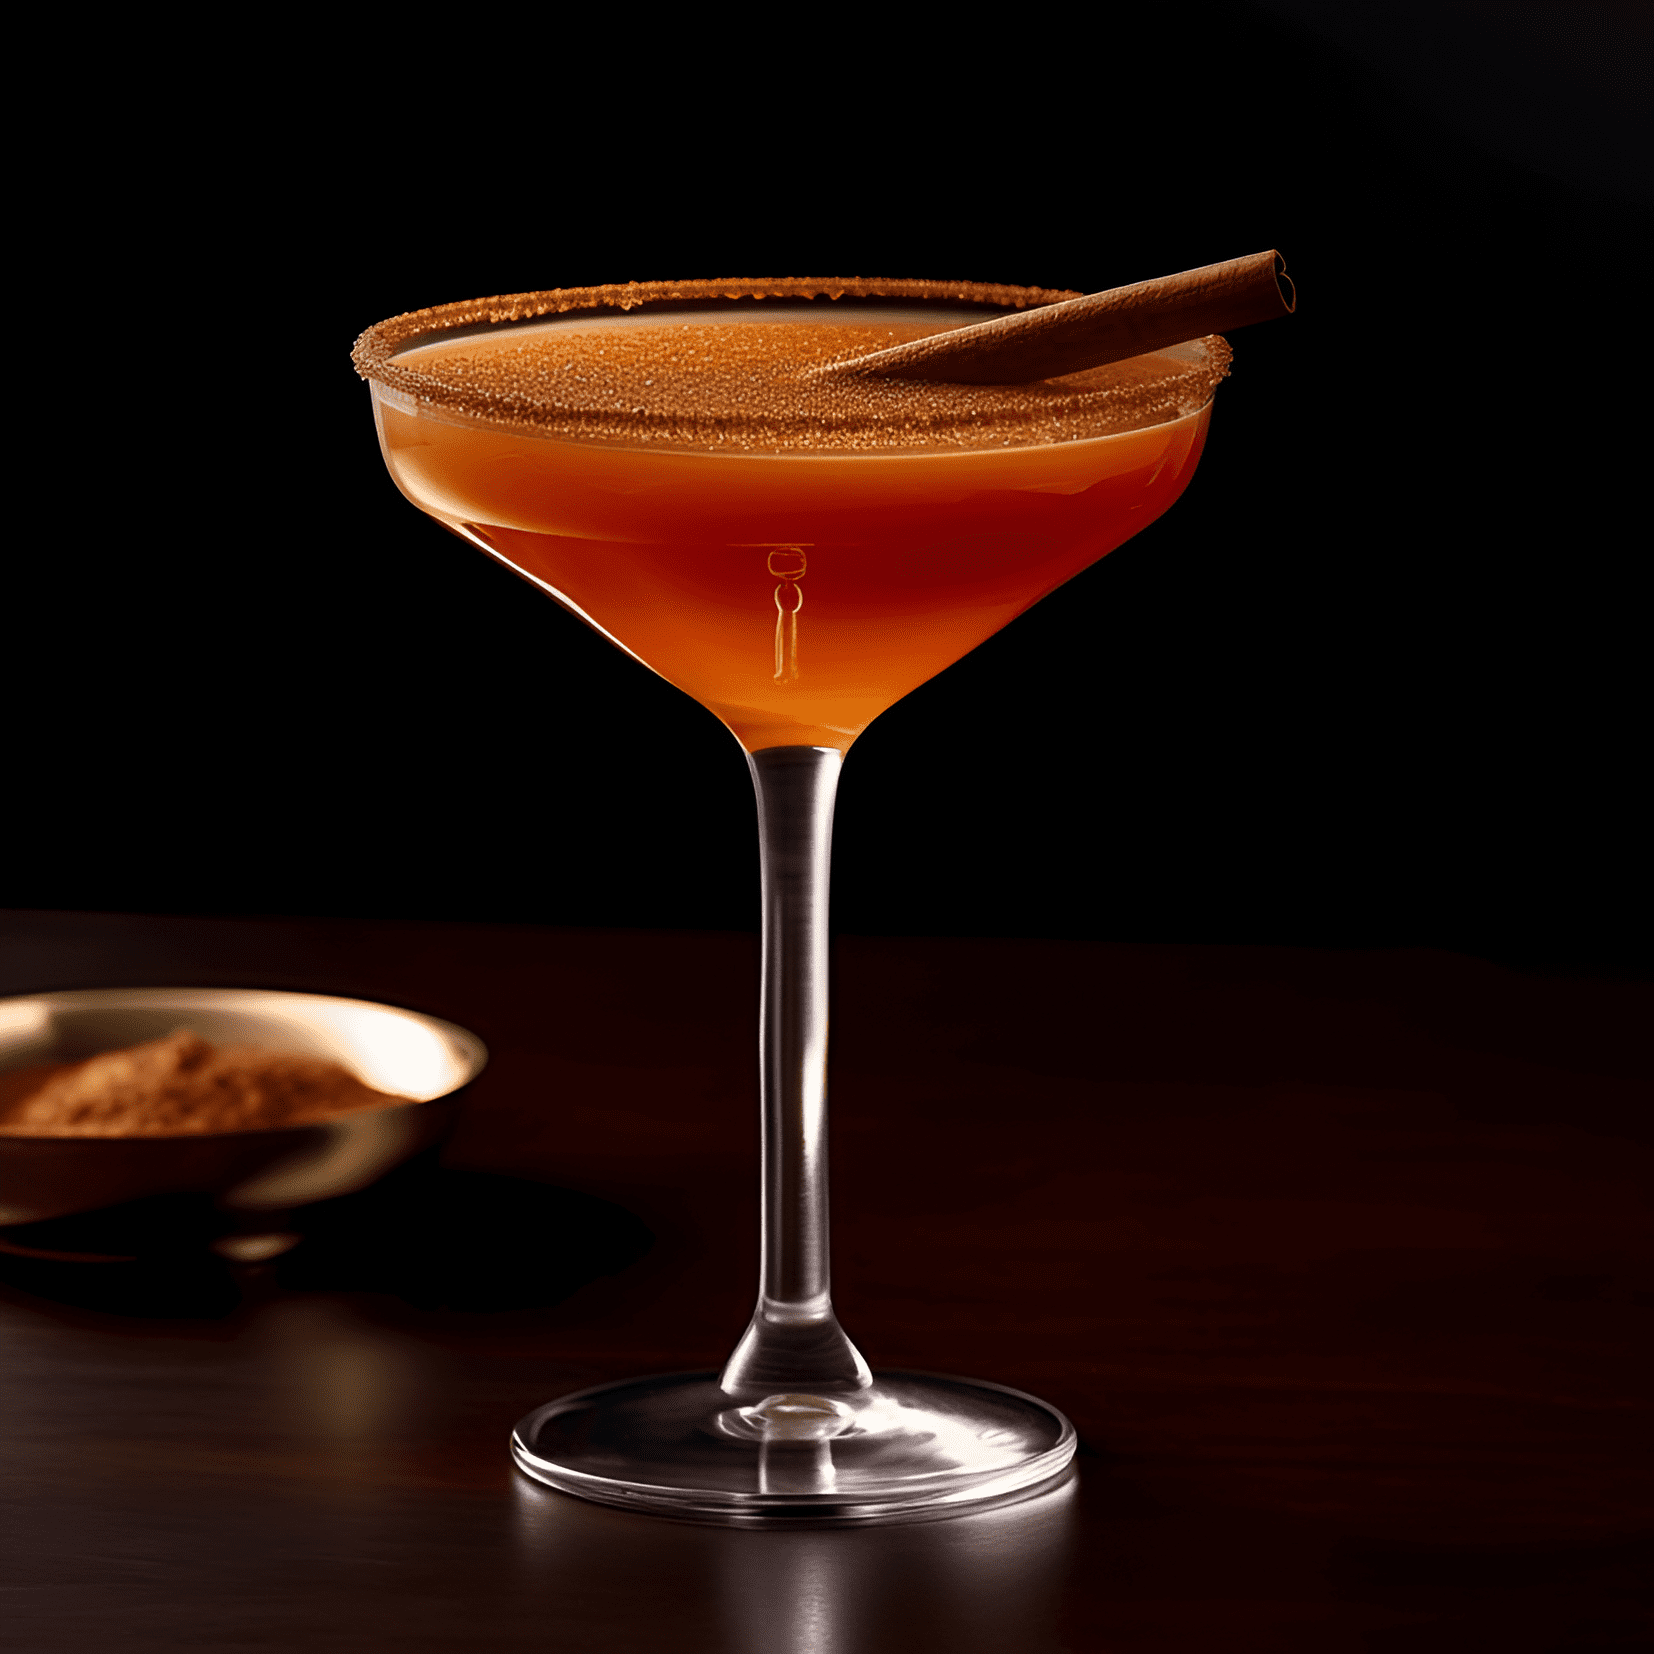 Noche de Amor Cocktail Recipe - Noche de Amor is a well-balanced cocktail with a delightful combination of sweet, sour, and fruity flavors. The rich and velvety texture is complemented by a subtle hint of spice and warmth from the cinnamon.